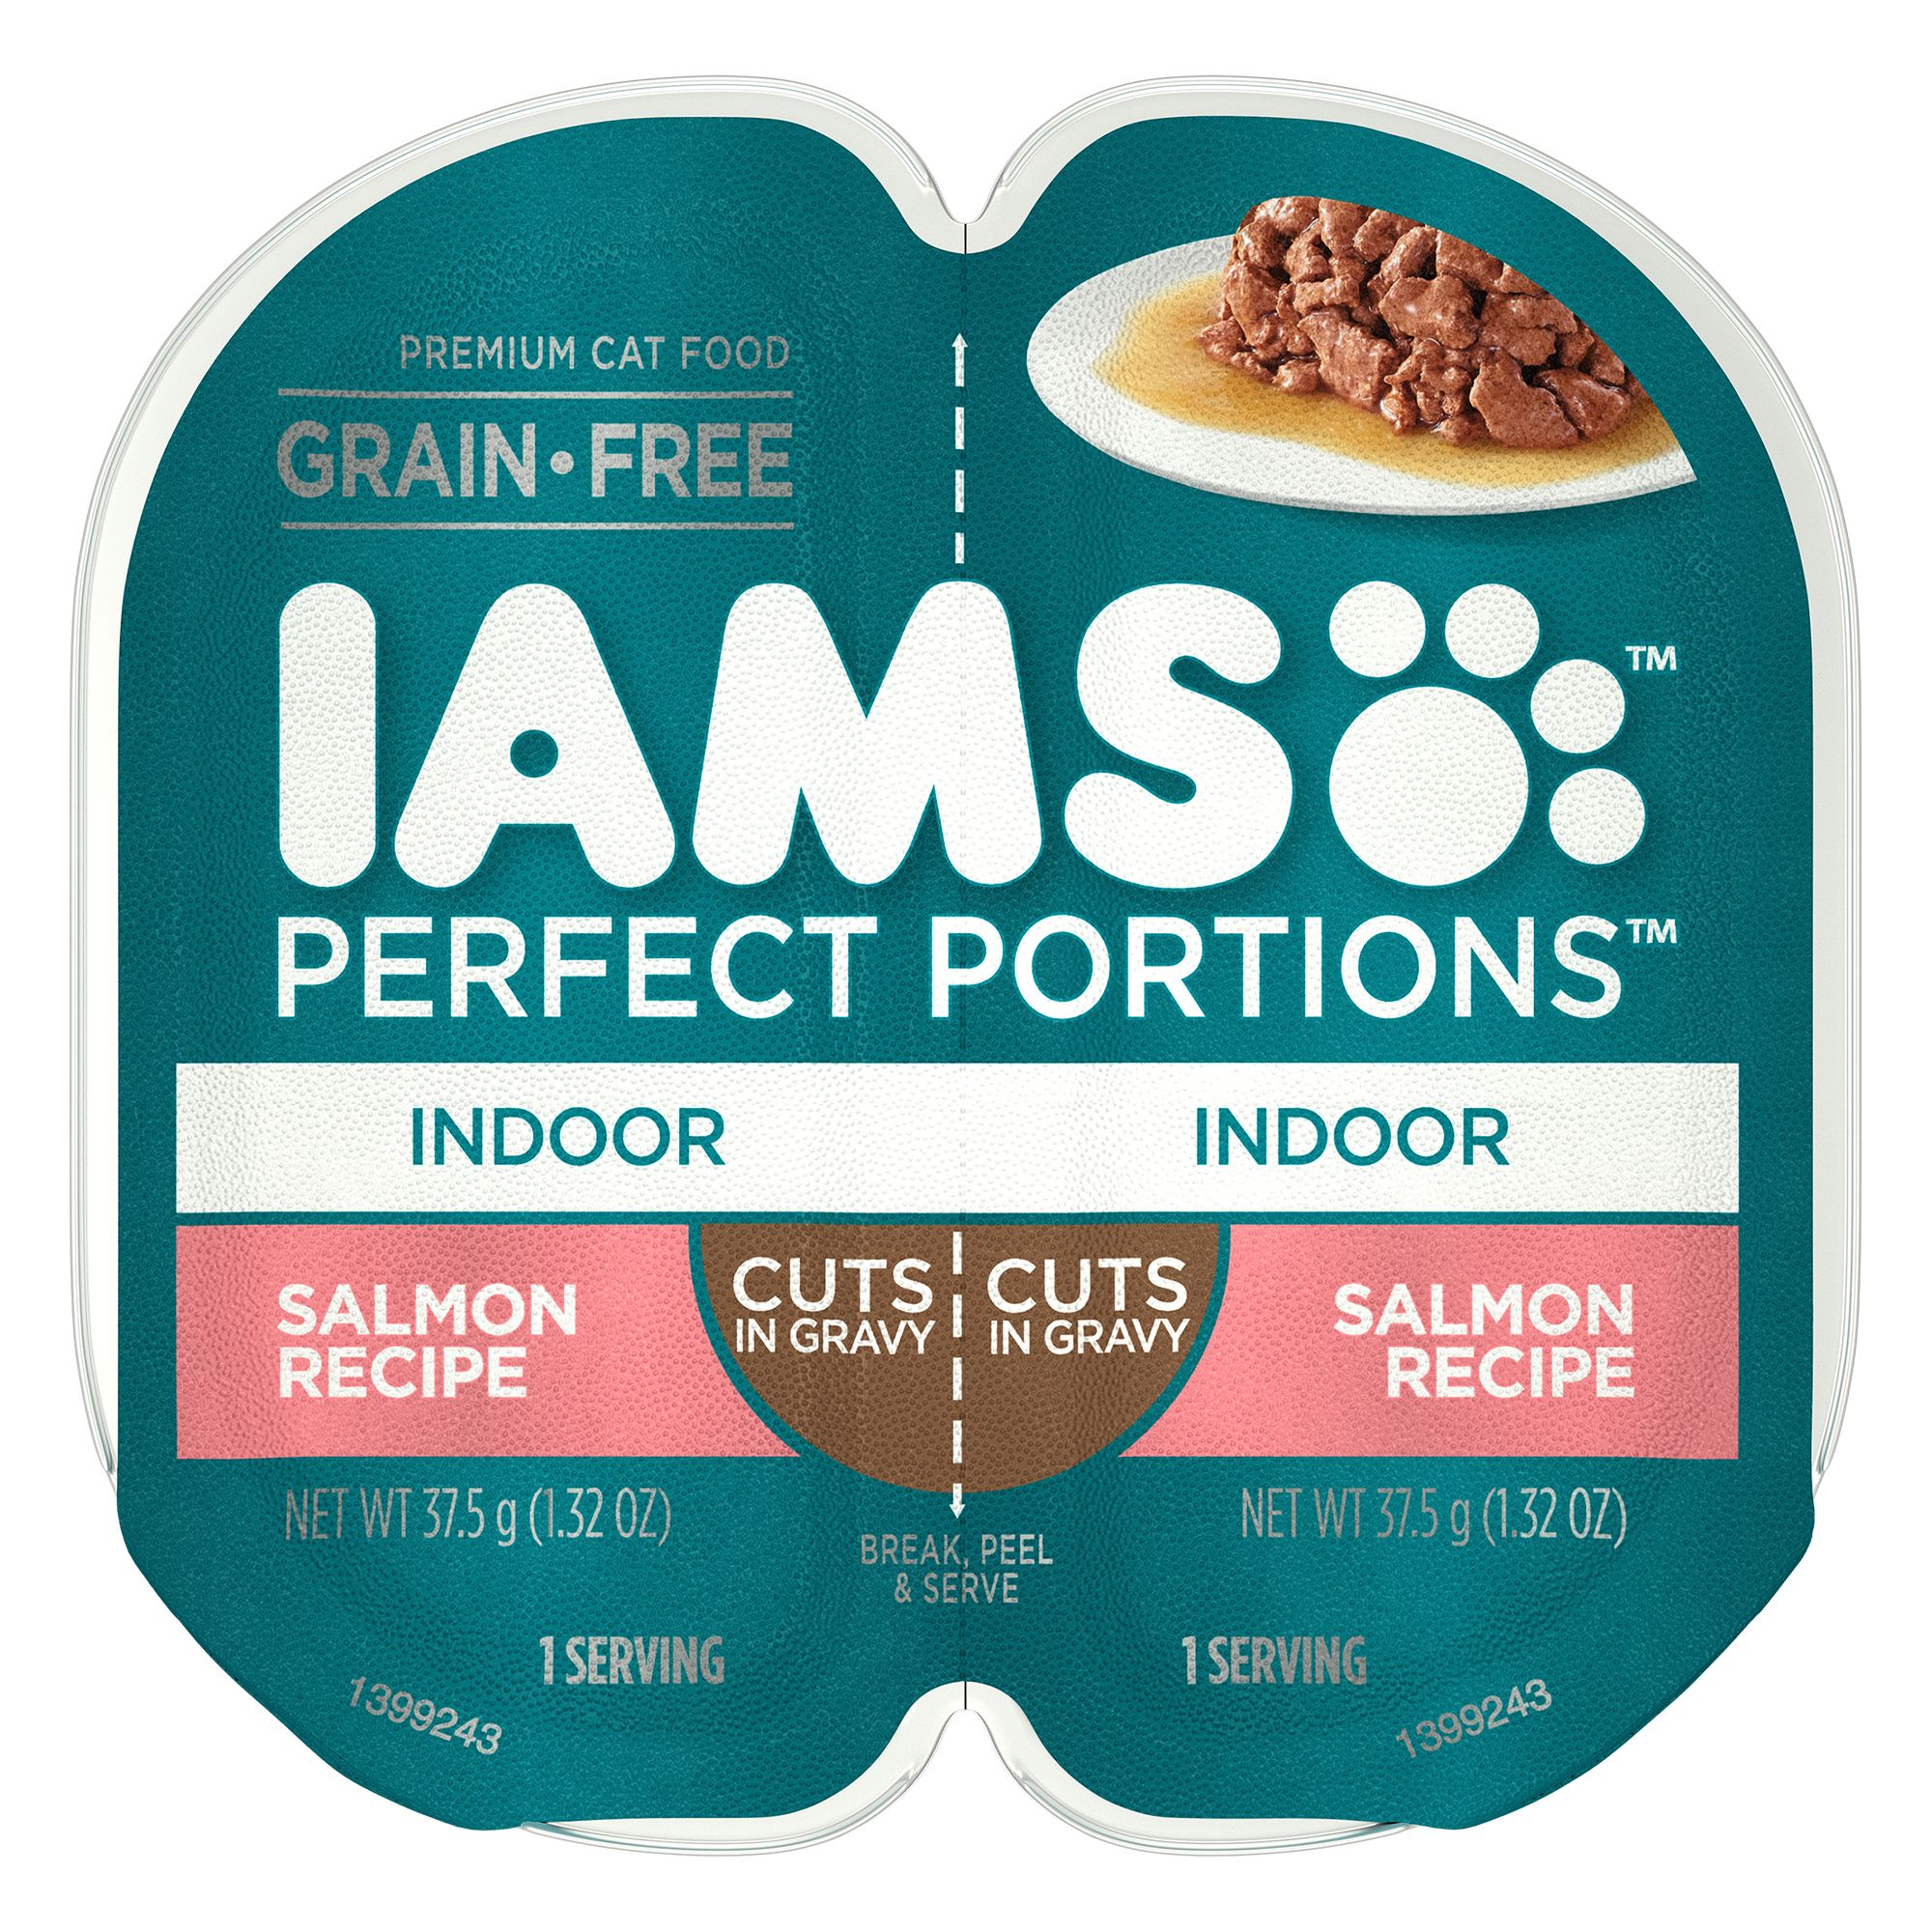 iams purrfect delicacies flaked adult wet cat food